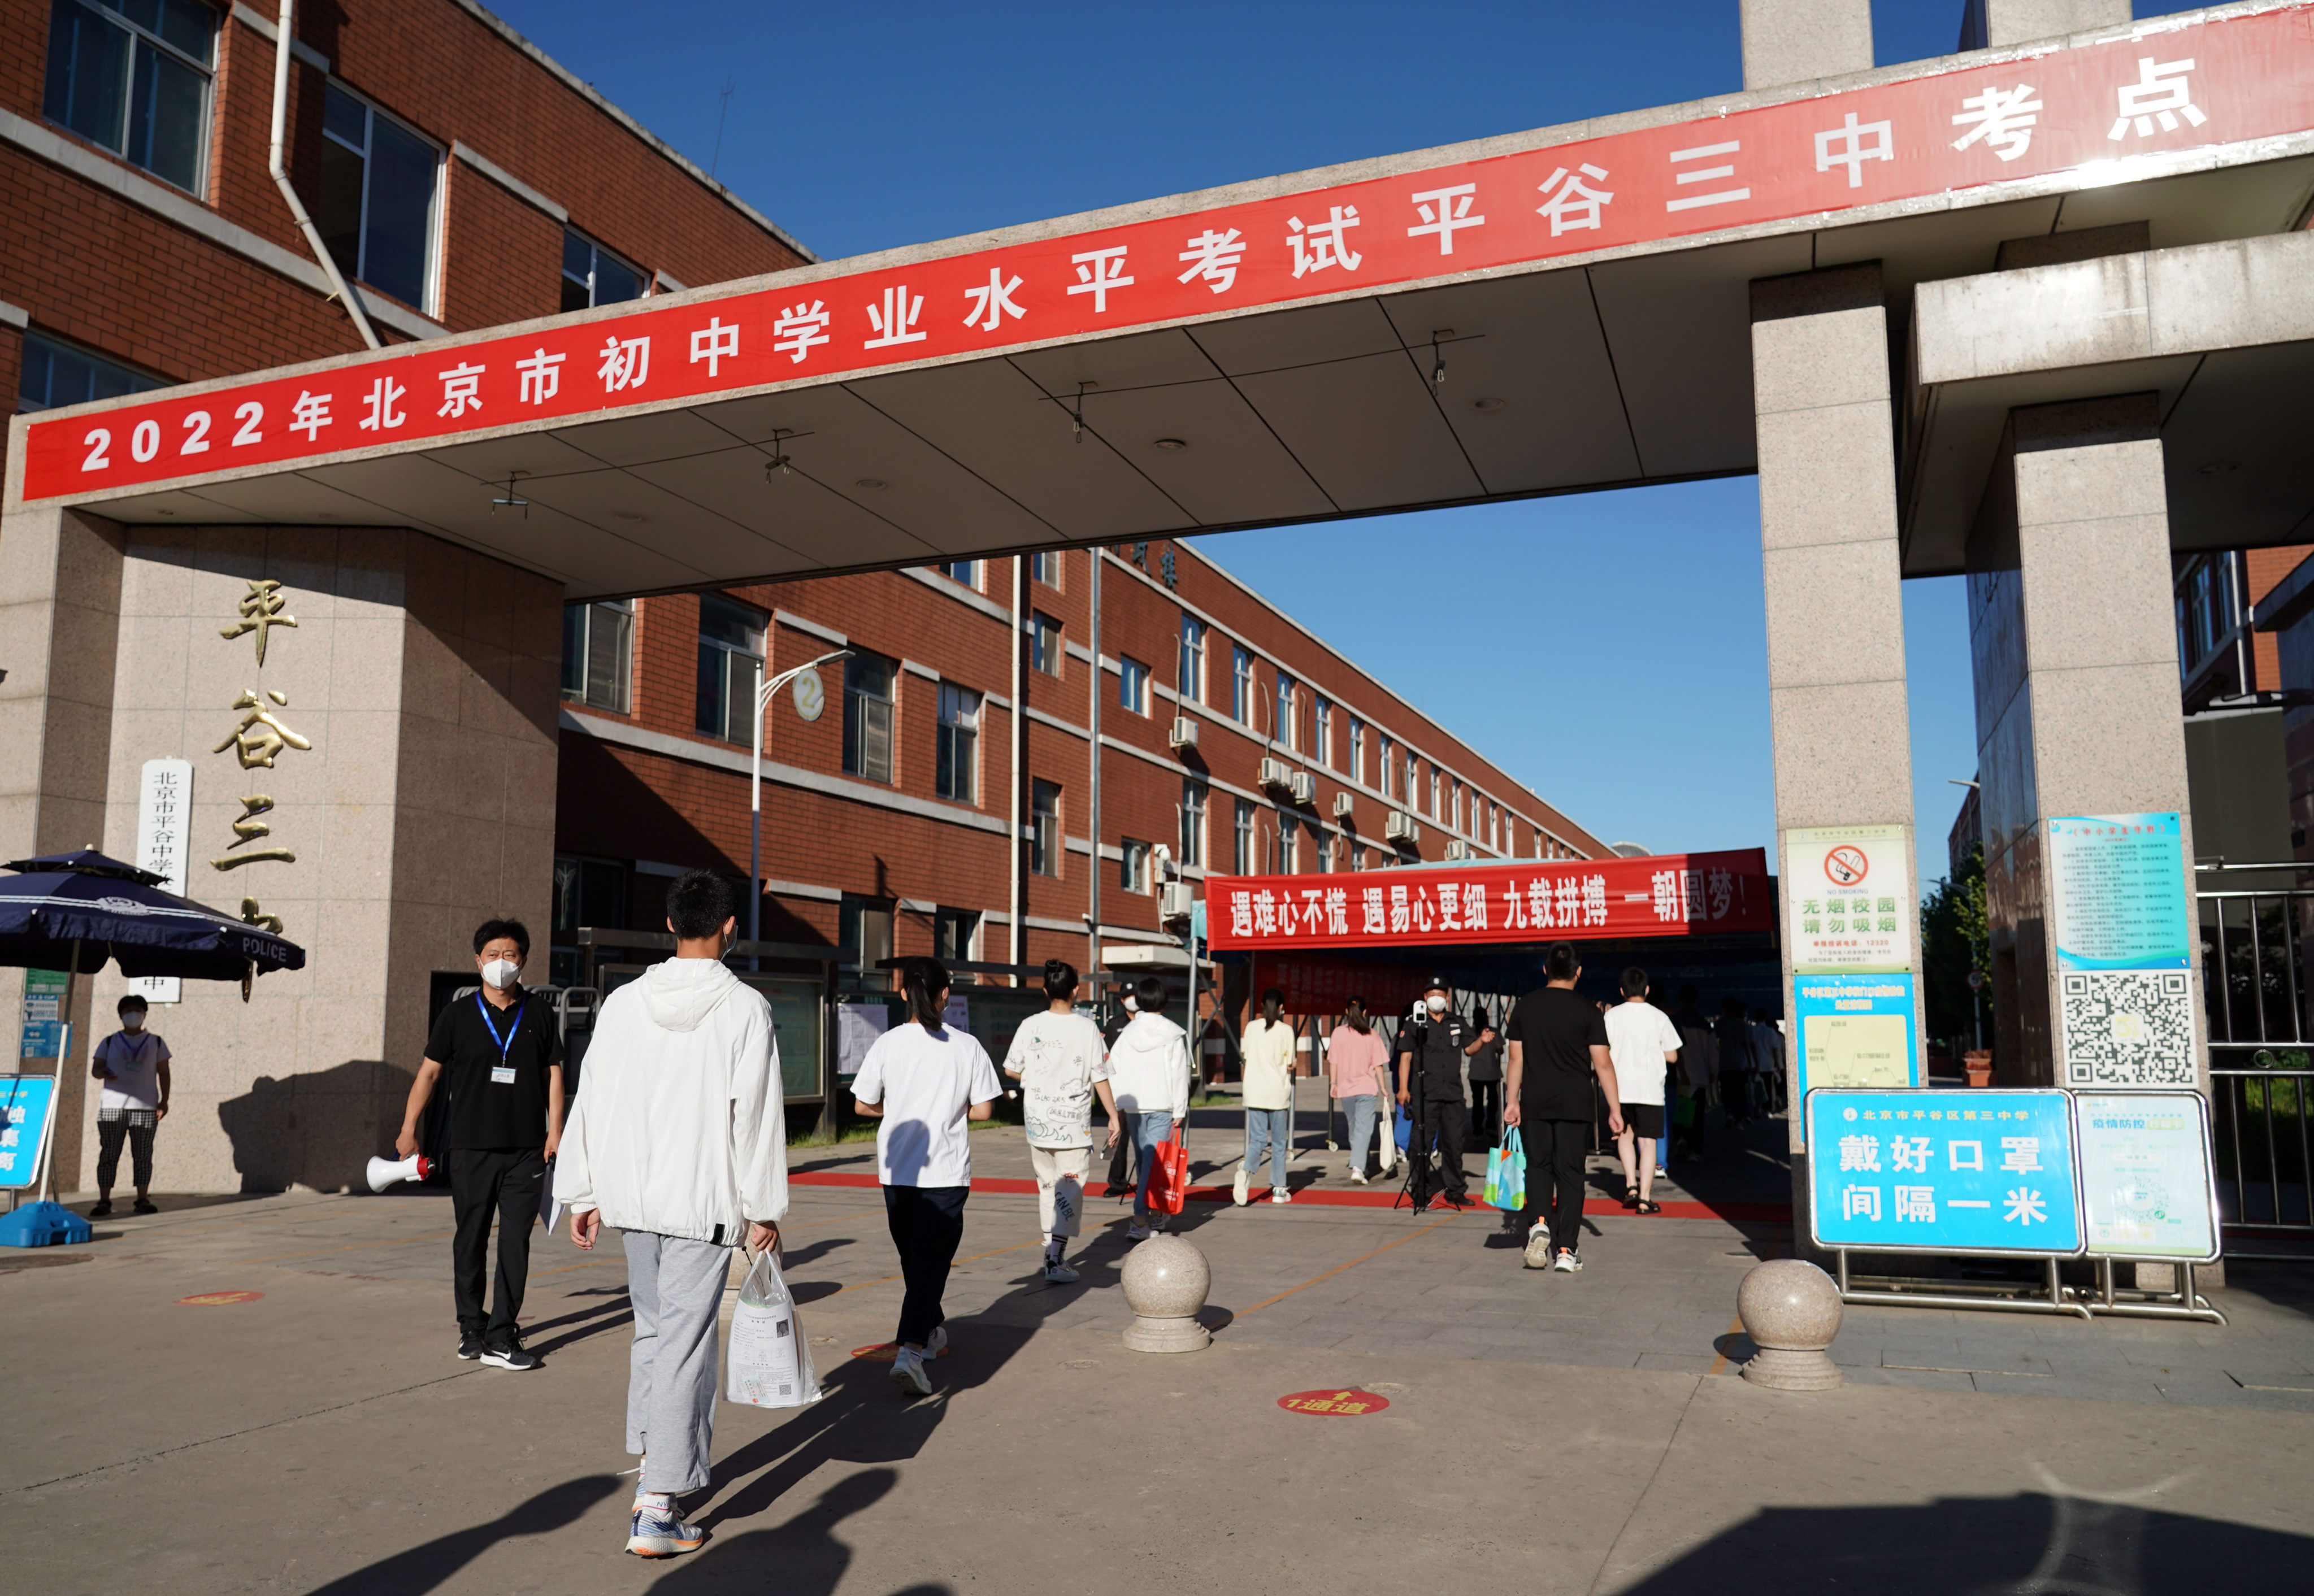 Students enter a senior high school for entrance examination in Pinggu District of Beijing in June 2022. Photo: Xinhua